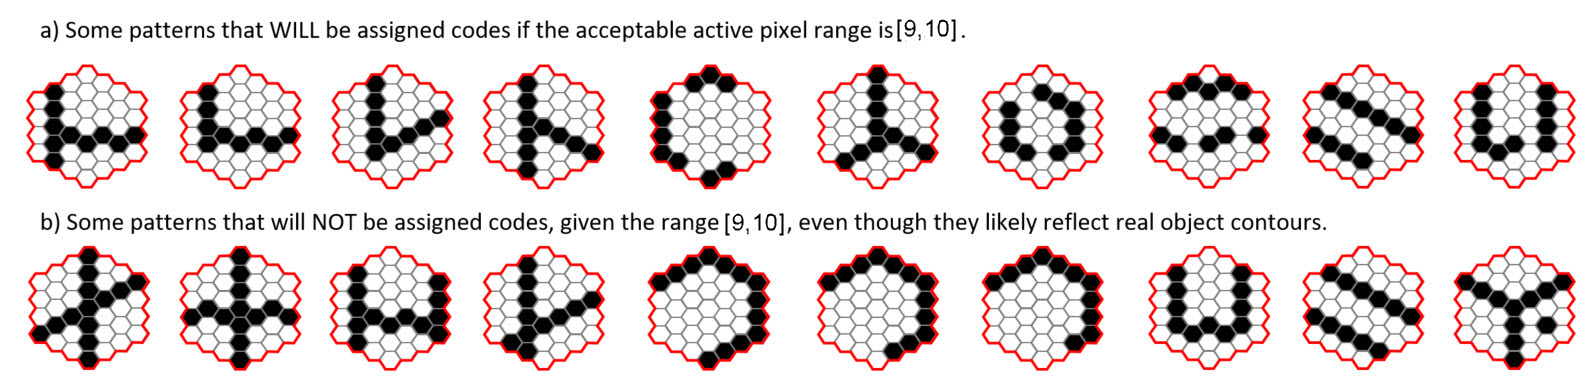 acceptable and unacceptable features for 6 to 10 pixel range